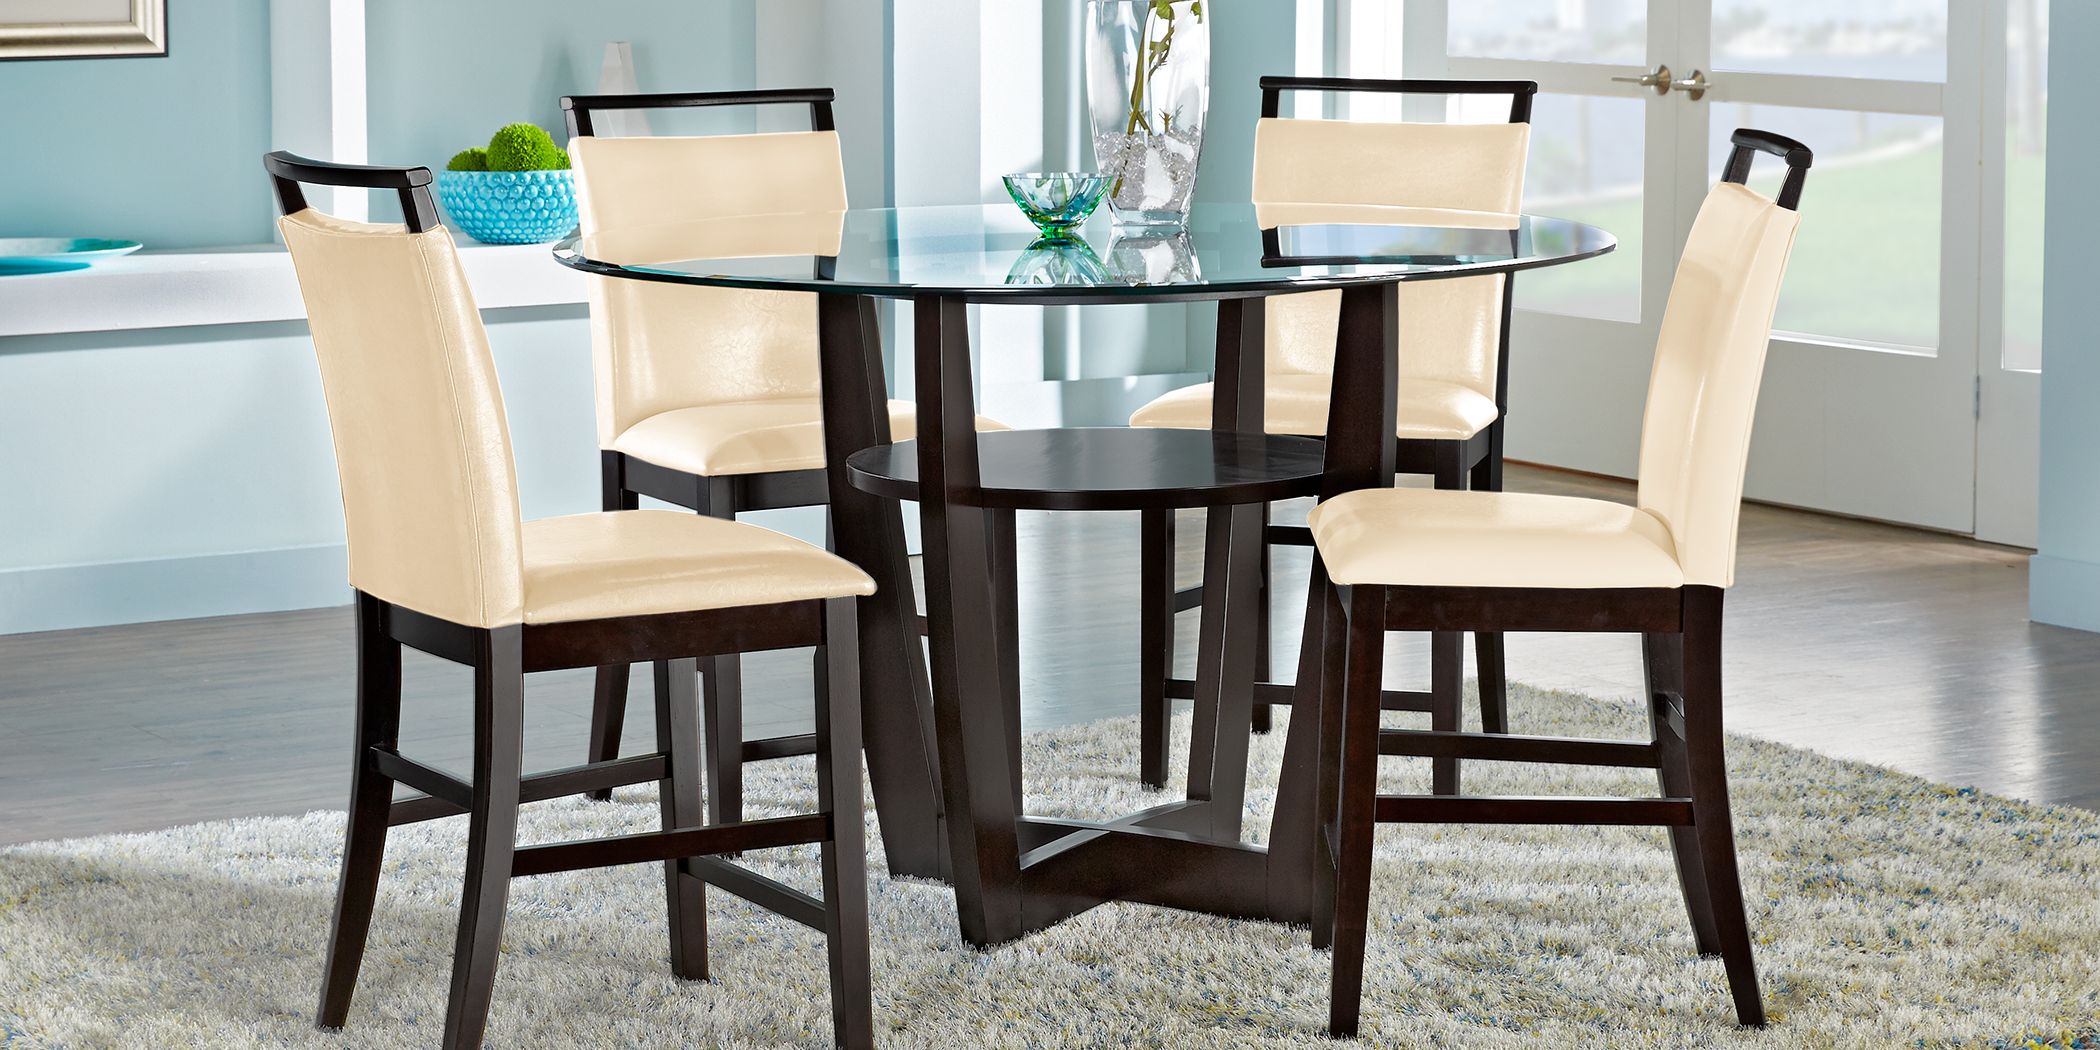 Counter Height Dining Room Table Sets, Pub Height Tables And Chairs